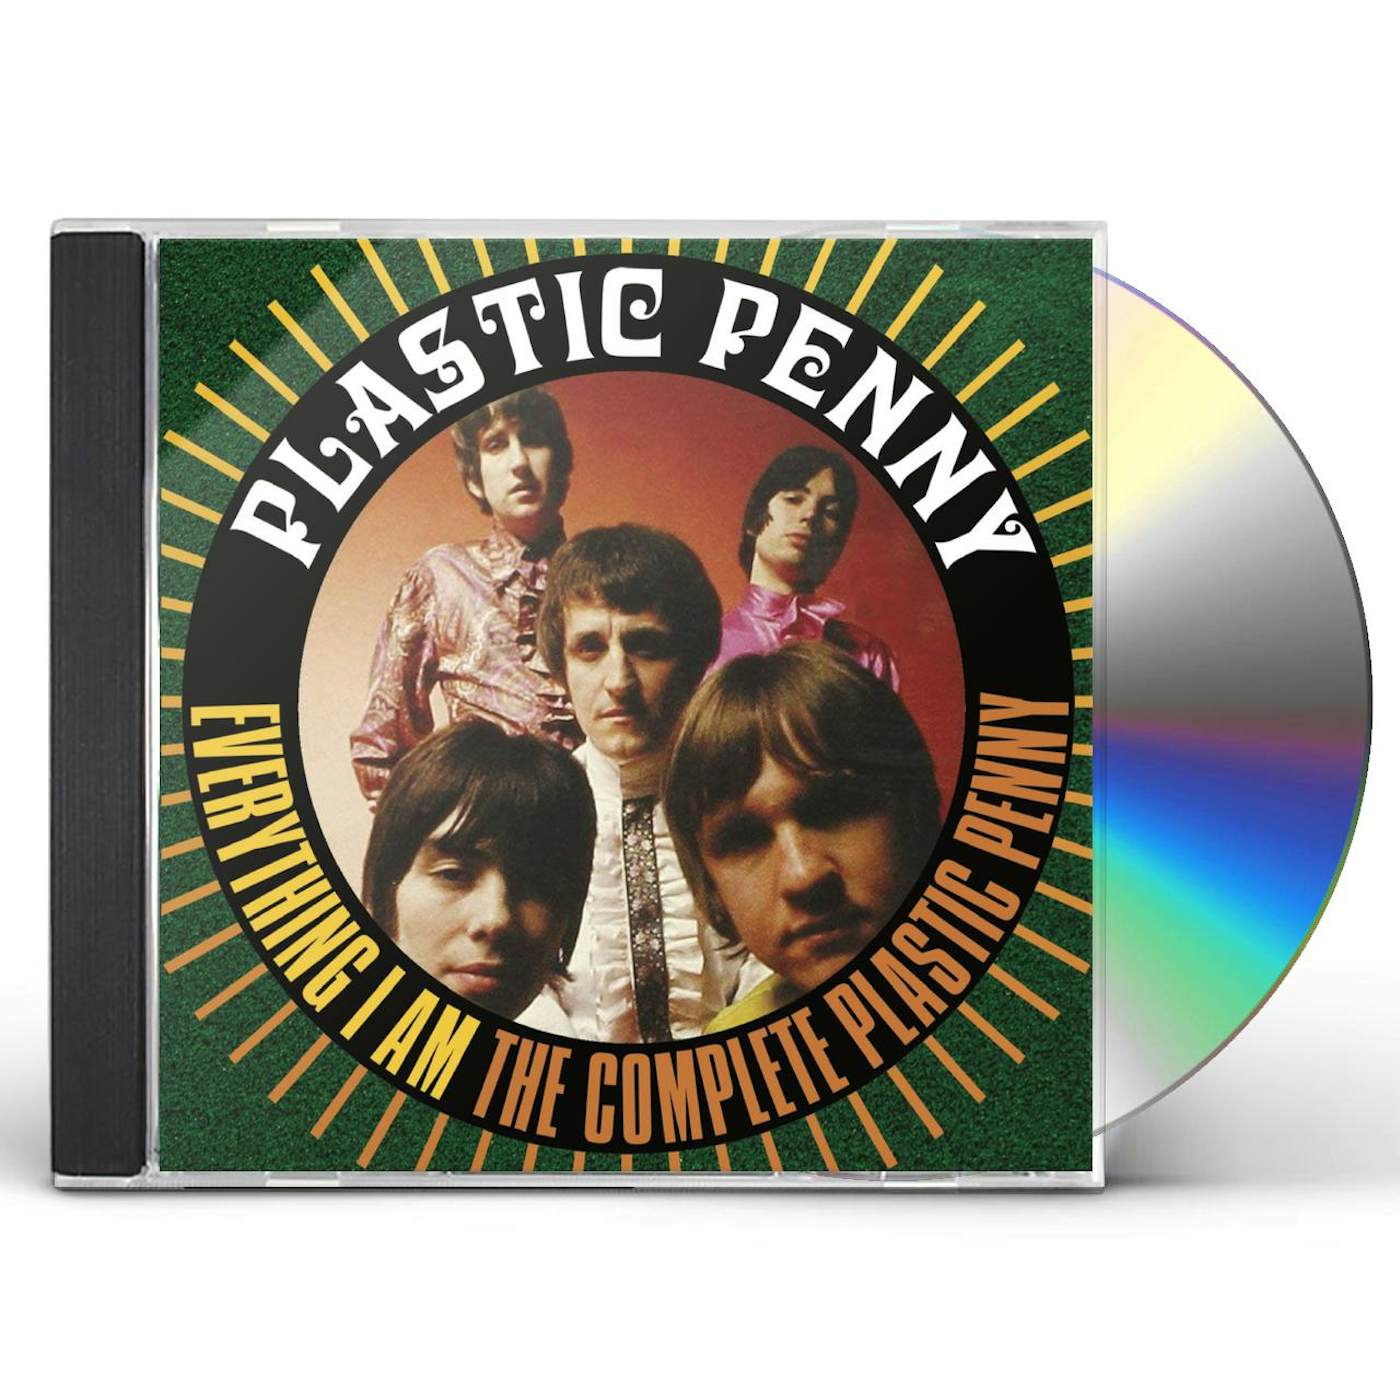 EVERYTHING I AM: COMPLETE PLASTIC PENNY CD